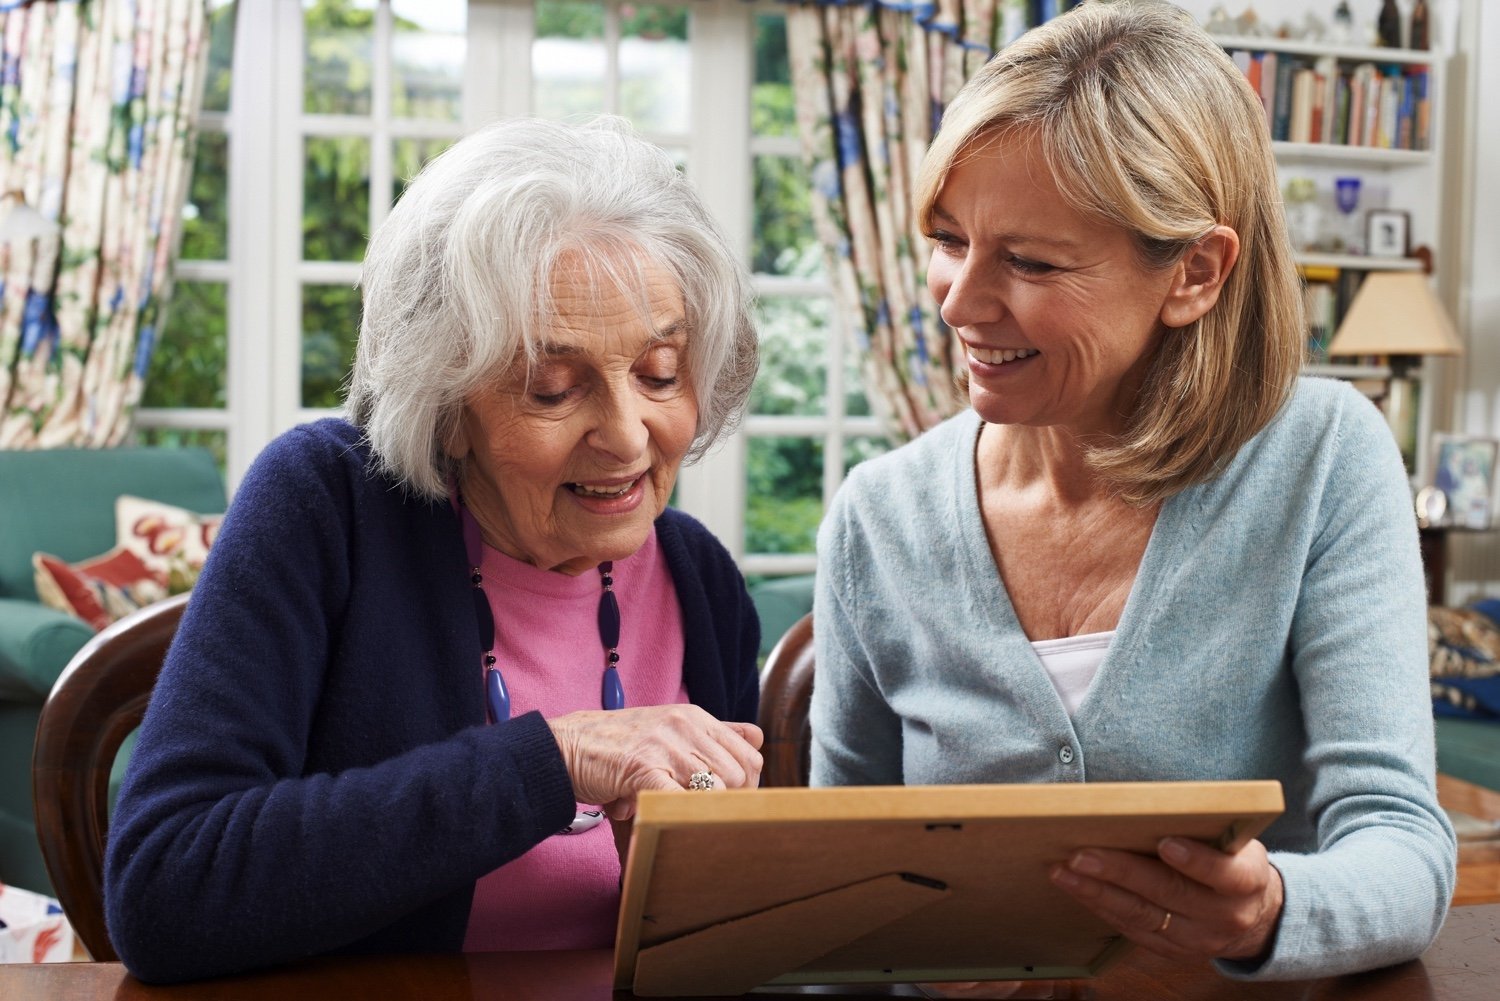 A senior woman and younger woman examine a photo together